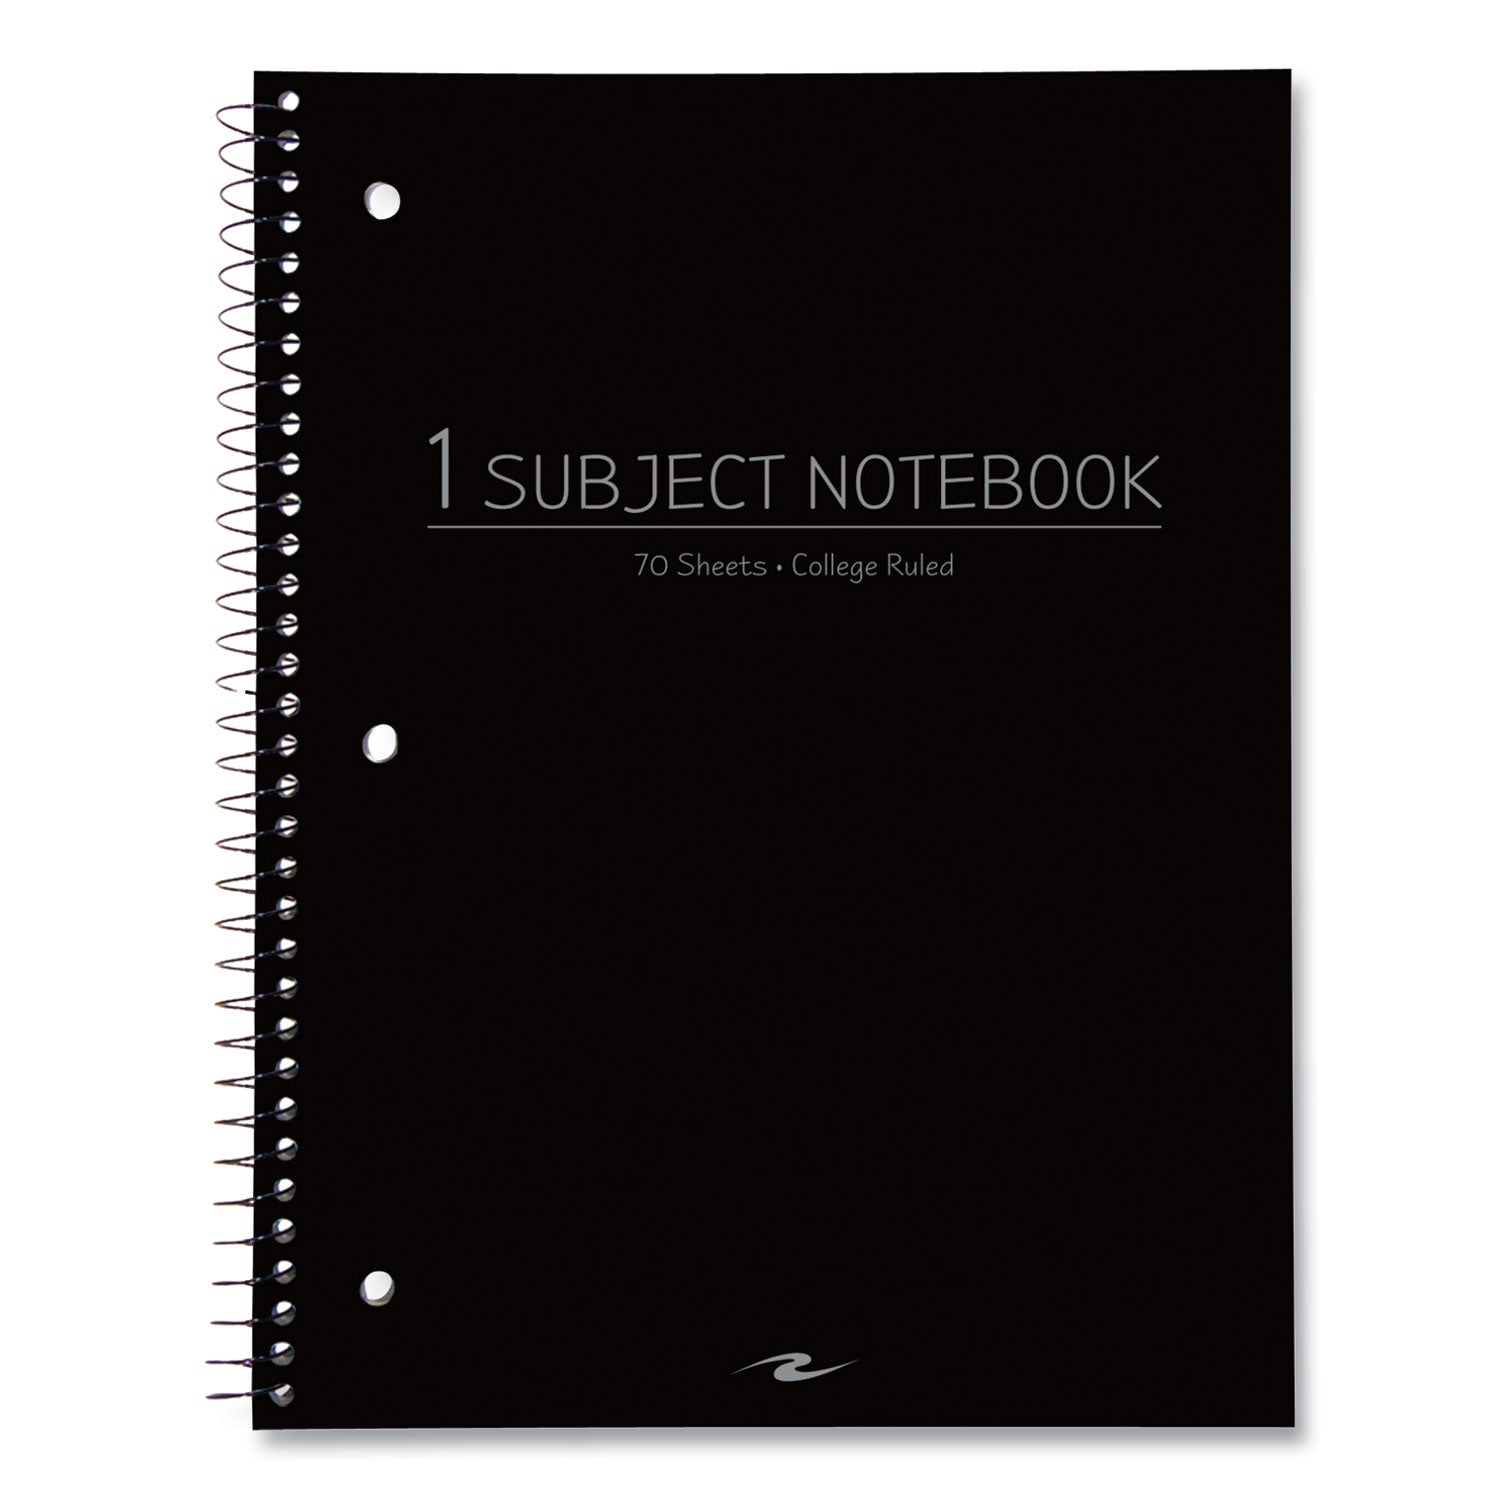 subject-wirebound-promo-notebook-1-subject-med-college-rule-asst-cover-70-105x8-sheets-24-ct-ships-in-4-6-bus-days_roa10033cs - 2